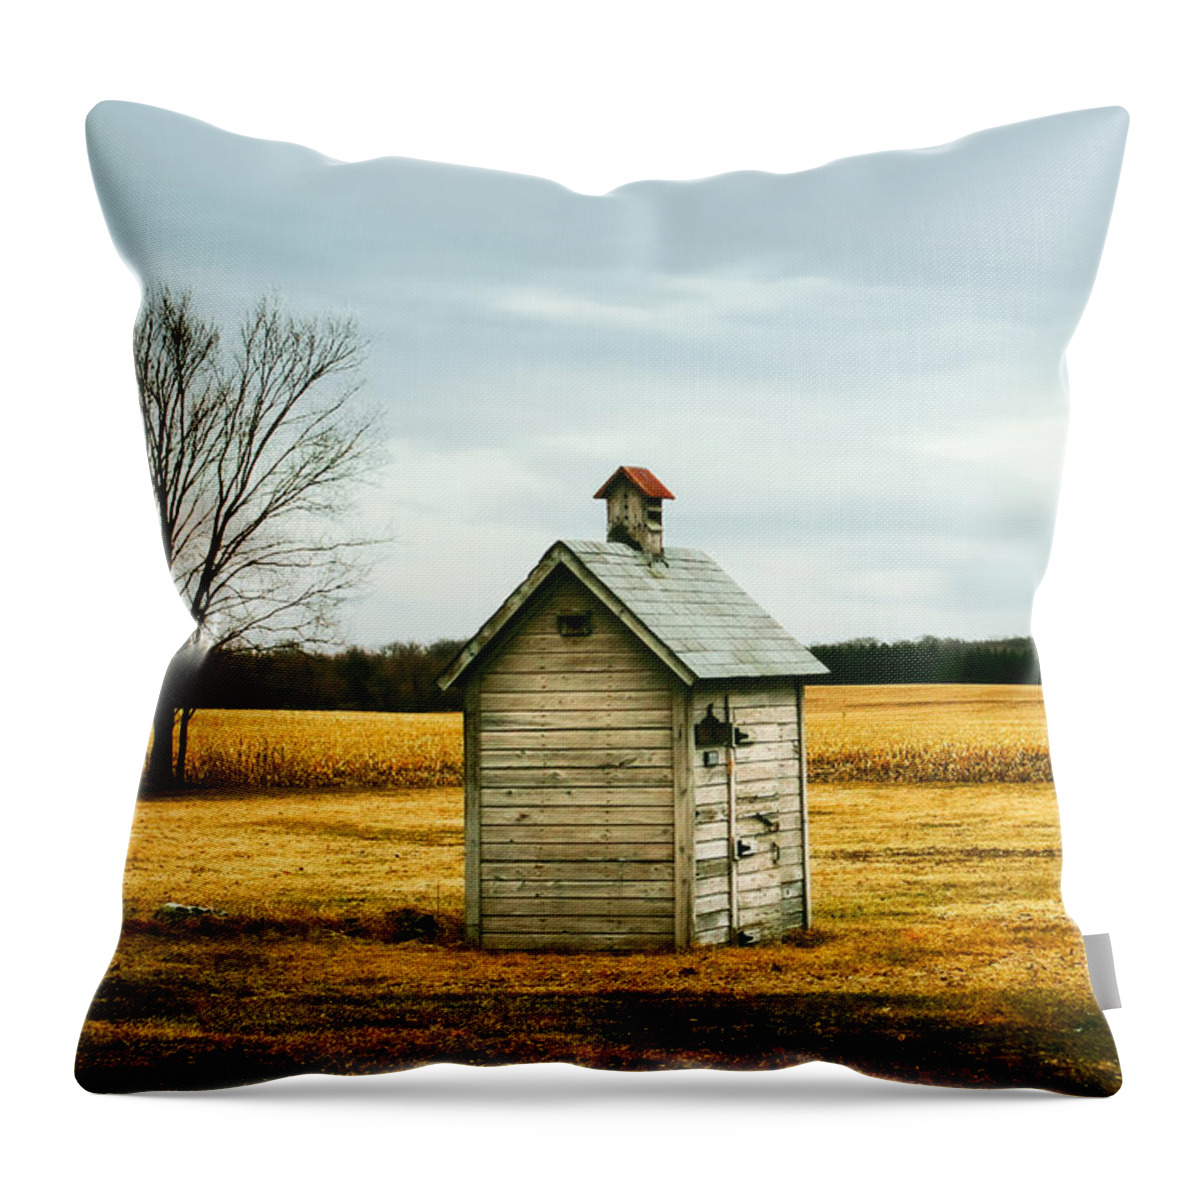 Outhouse Throw Pillow featuring the photograph The Outhouse by Todd Klassy